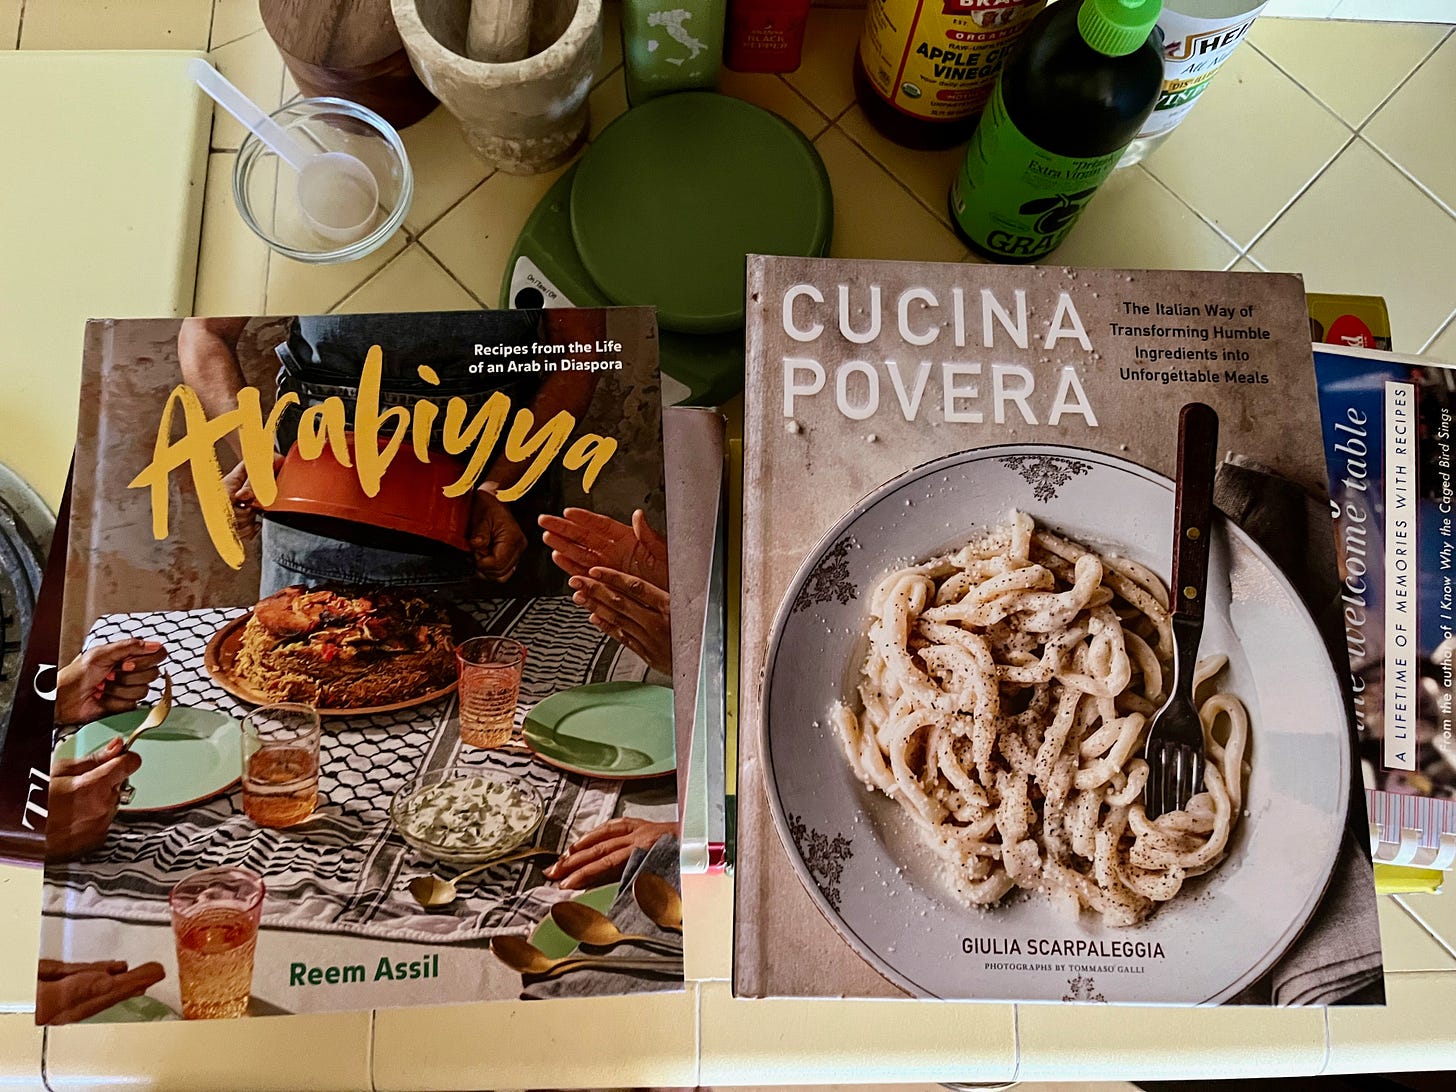 Arabiyya: Recipes from the Life of an Arab in Diaspora (2022) by Reem Assil and Cucina Povera: The Italian Way of Transforming Humble Ingredients Into Unforgettable Meals (2023) by Giulia Scarpaleggia